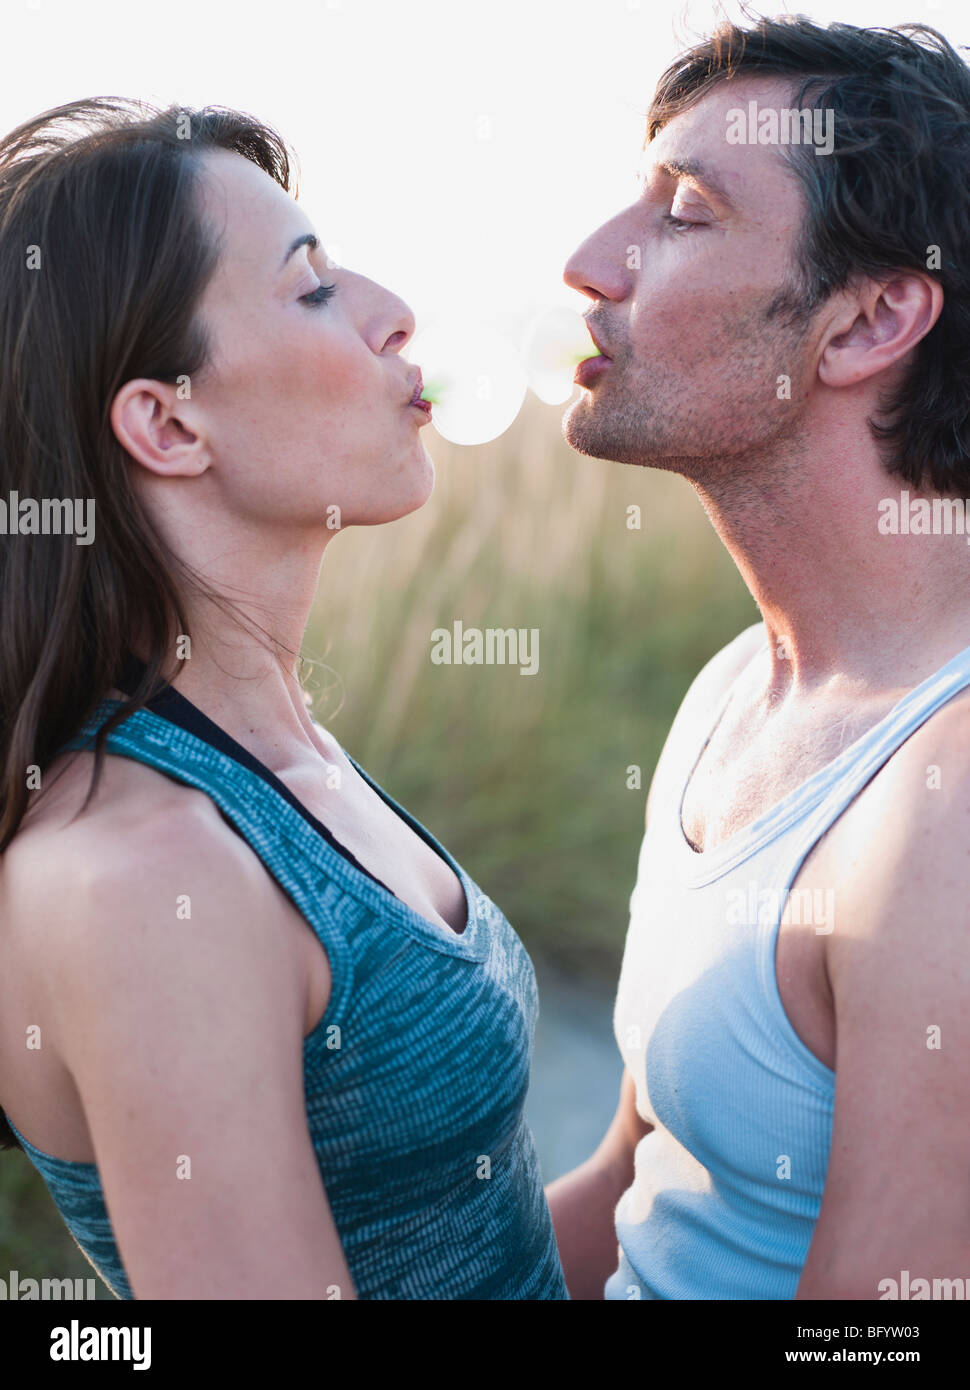 couple playing with bubble gum Stock Photo